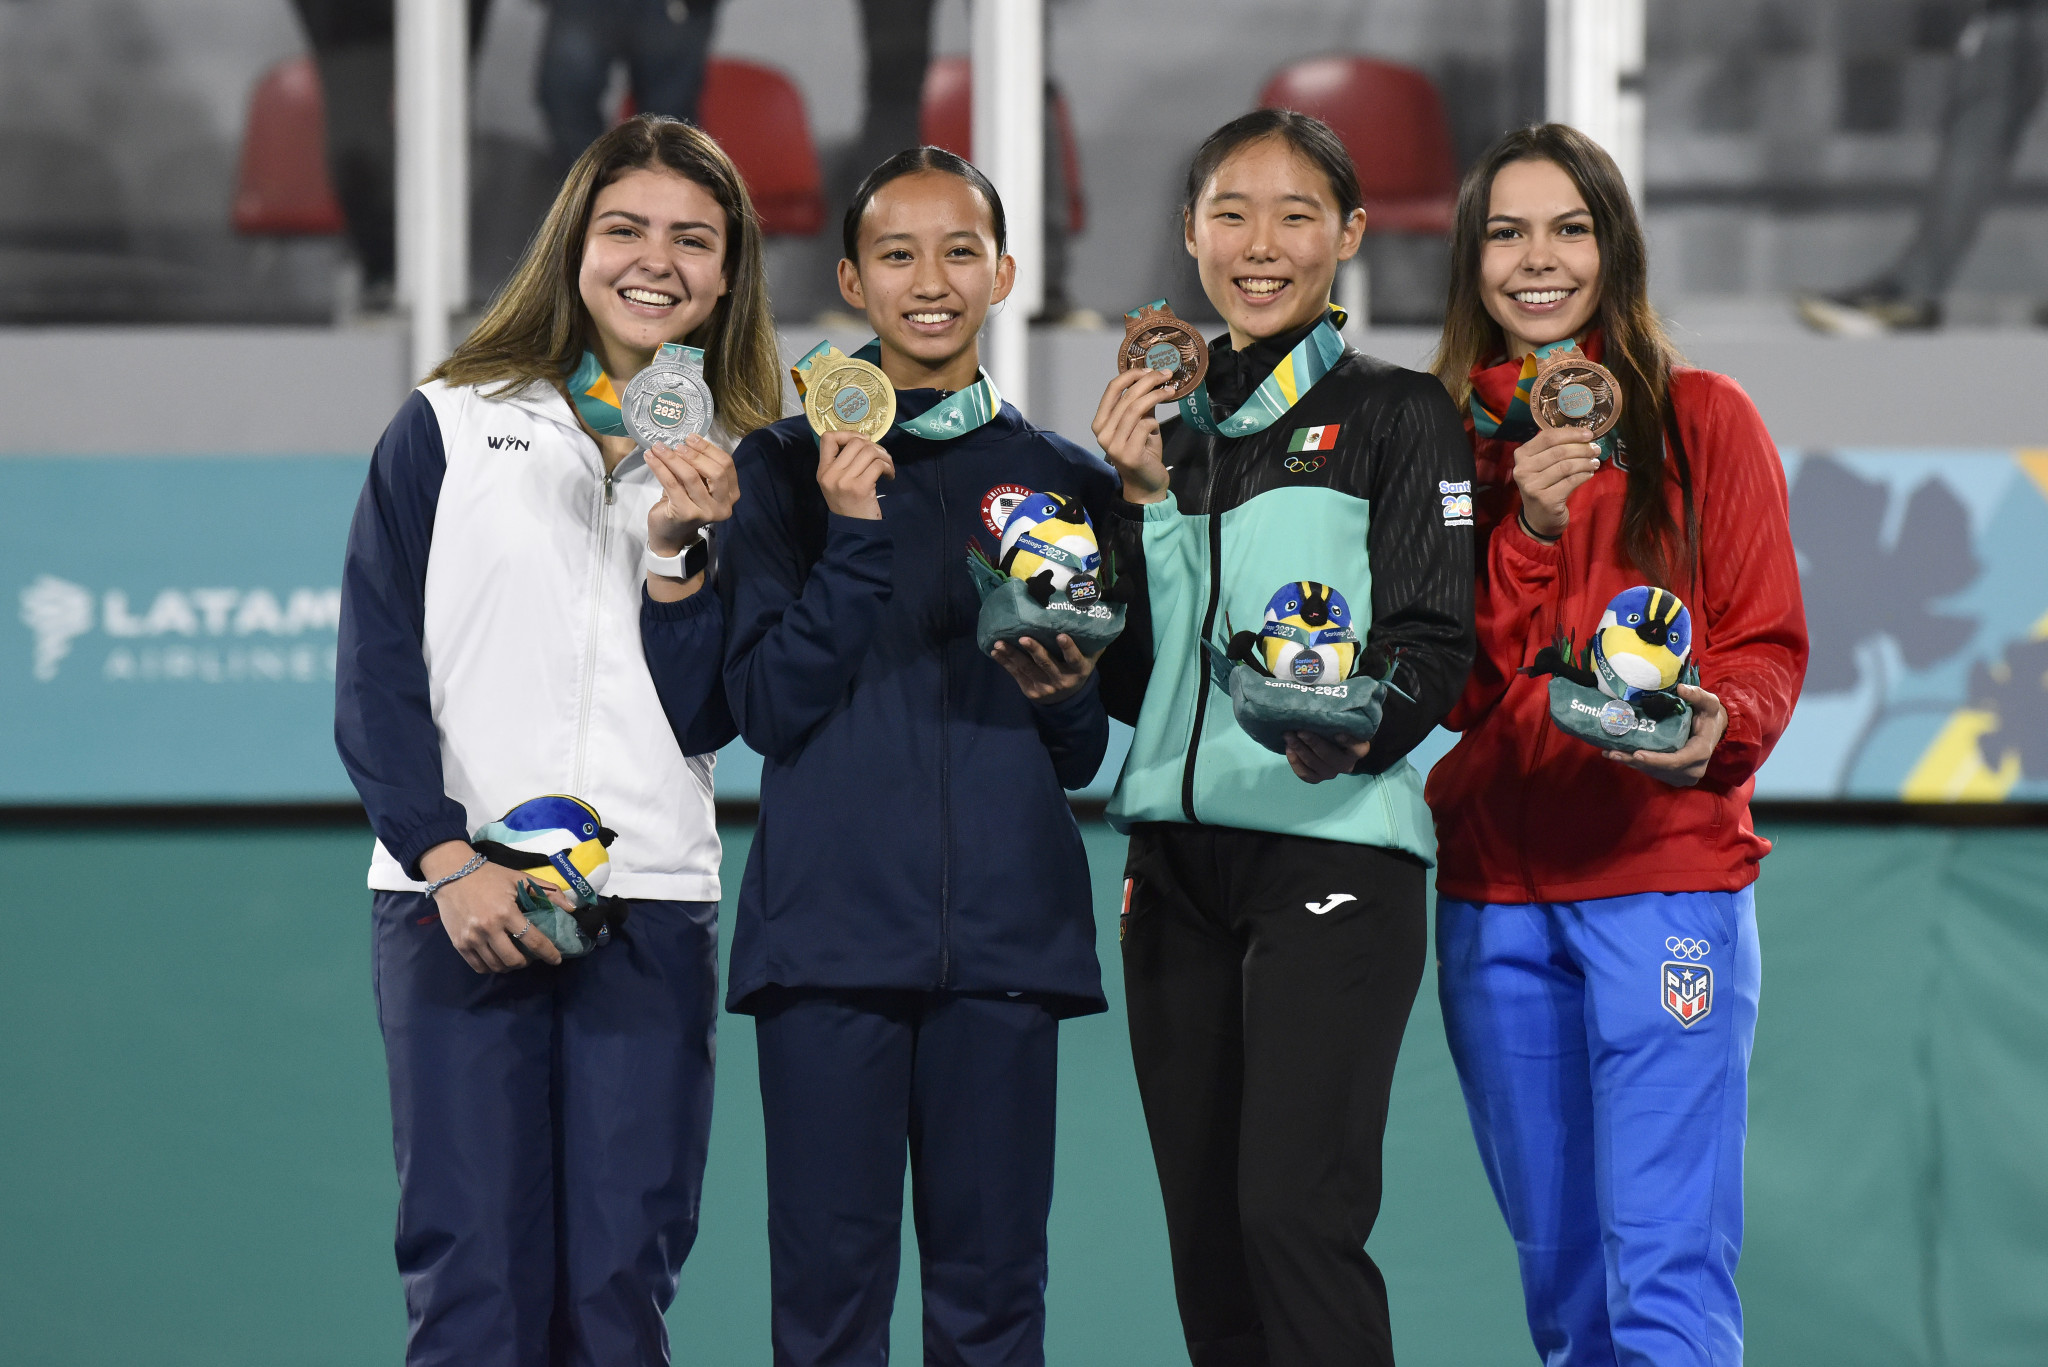 Maria Higueros, left, was the first Guatemalan to win a Pan American Games medal at Santiago 2023 when she took silver in the women's individual poomsae competing as a neutral under the Panam Sports Flag ©Getty Images